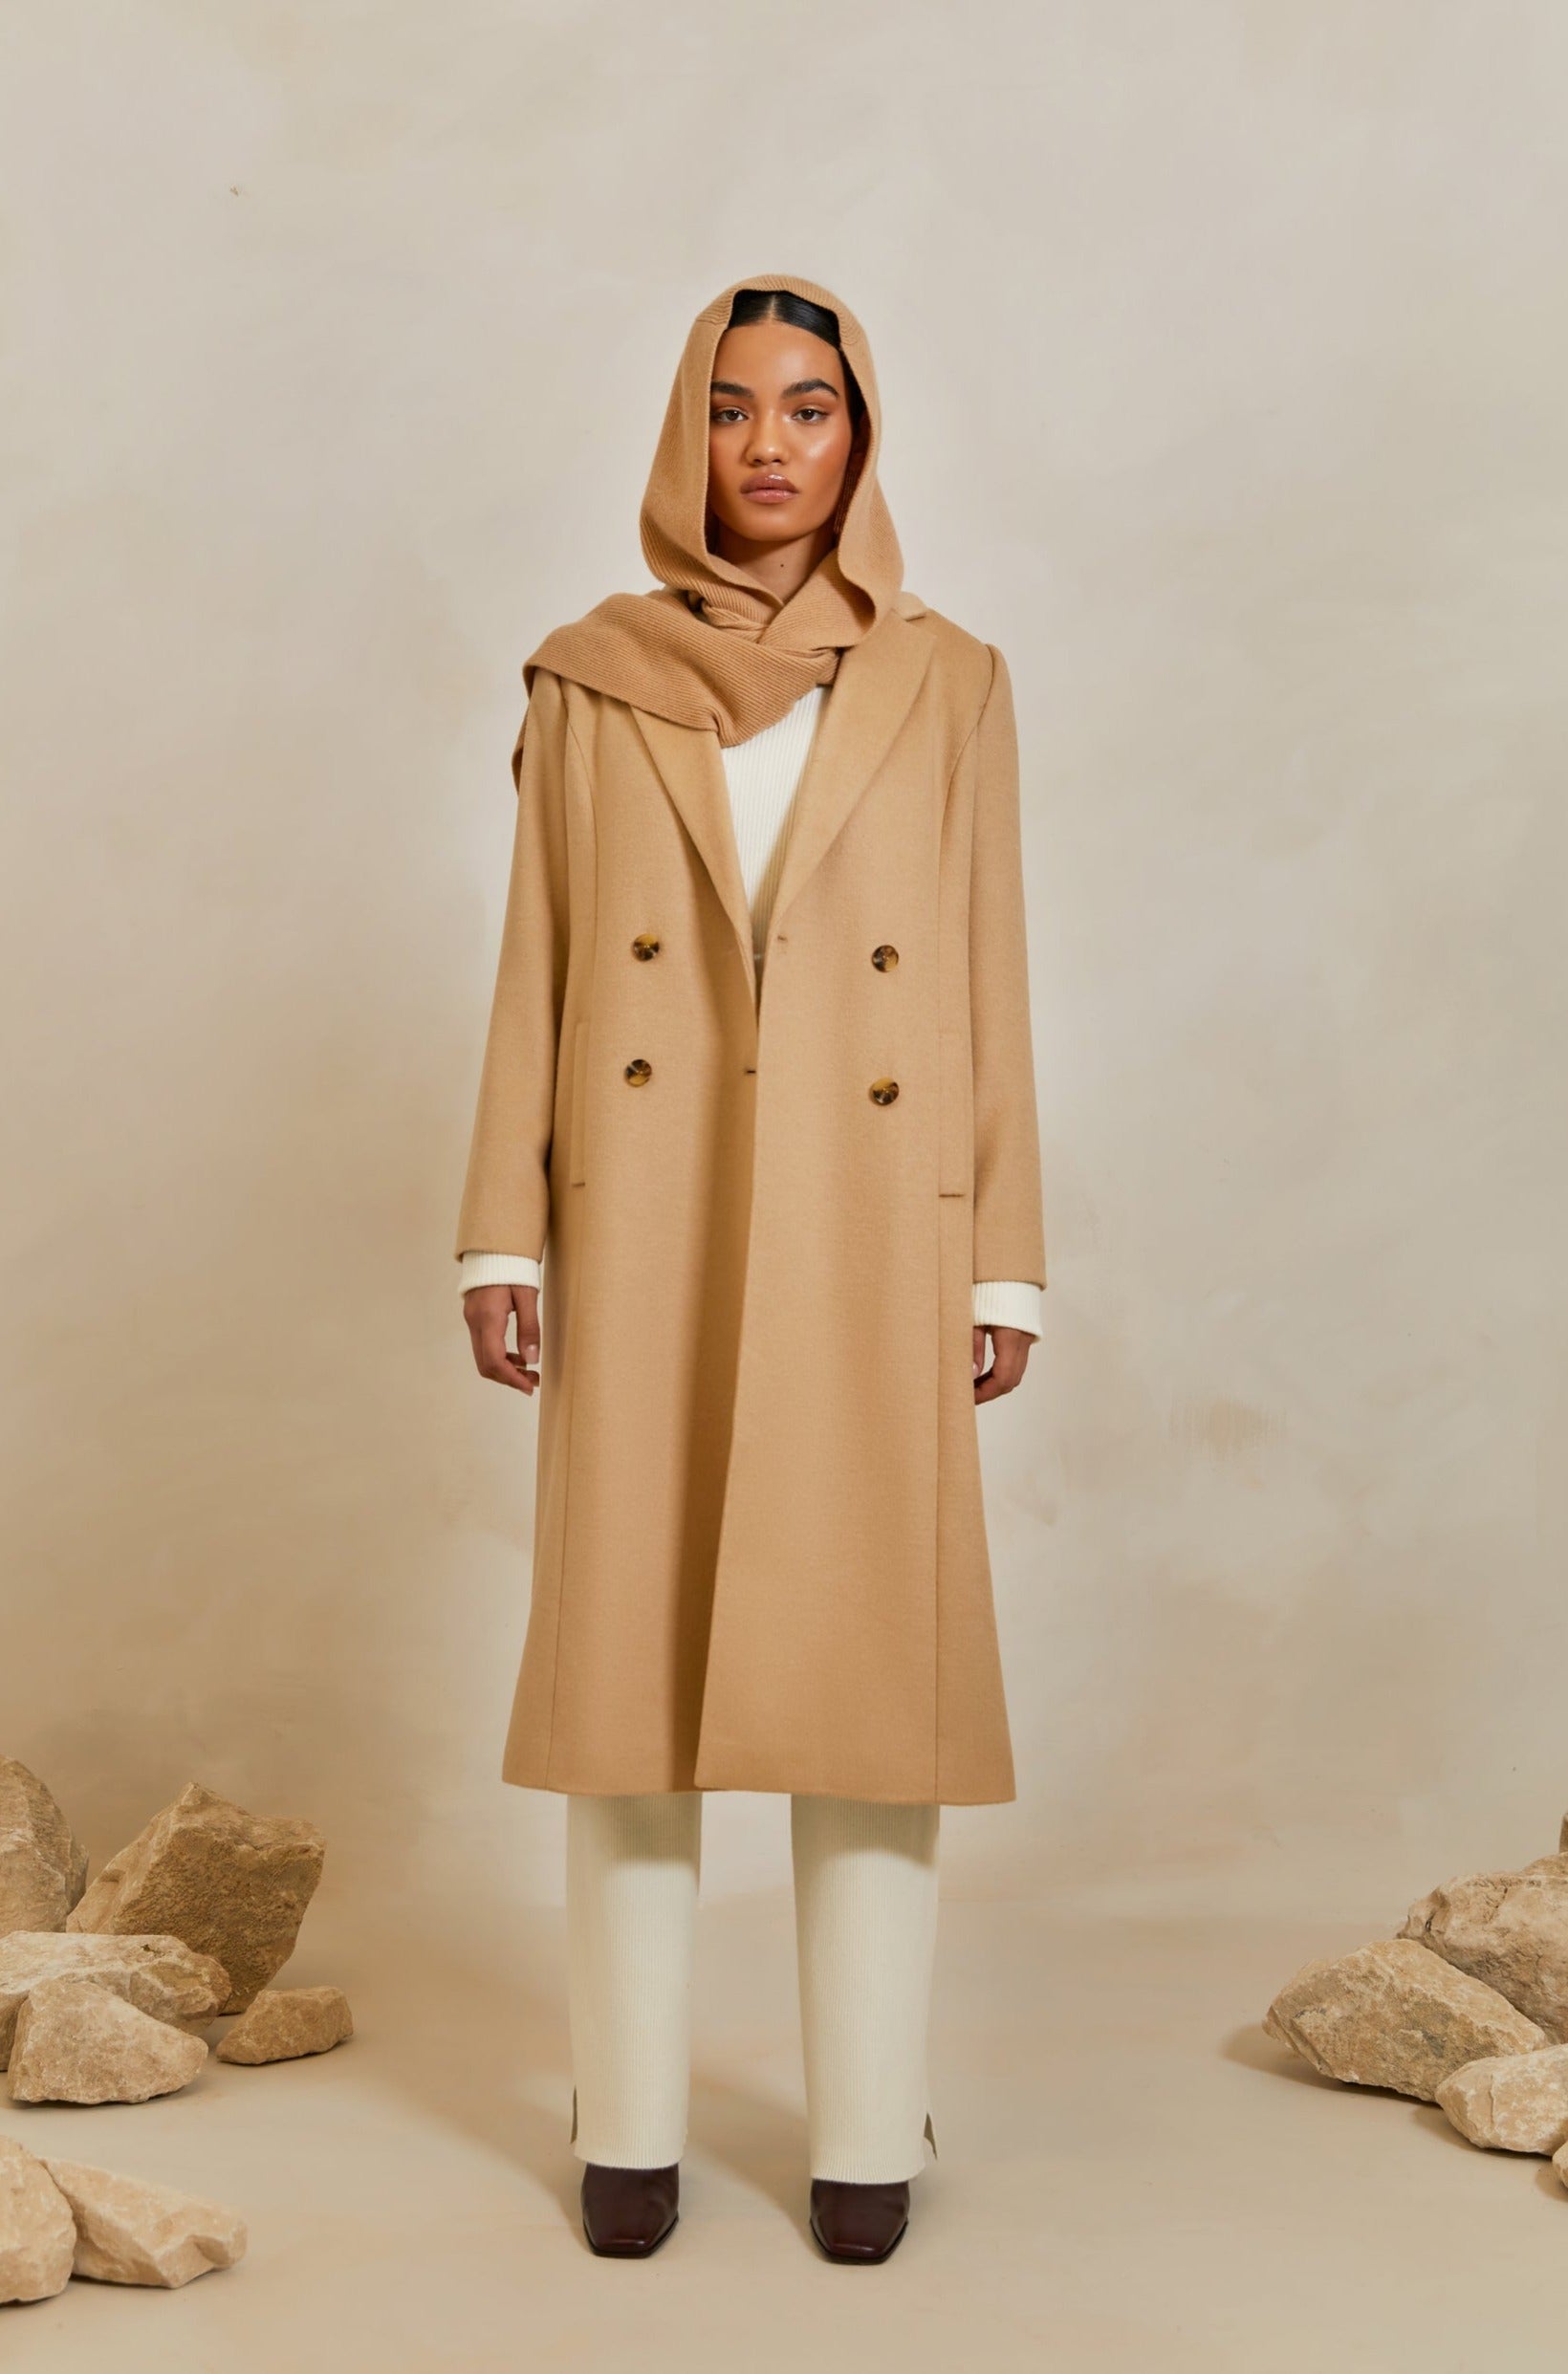 Wool Mix Long Line Double Breasted Tailored Coat